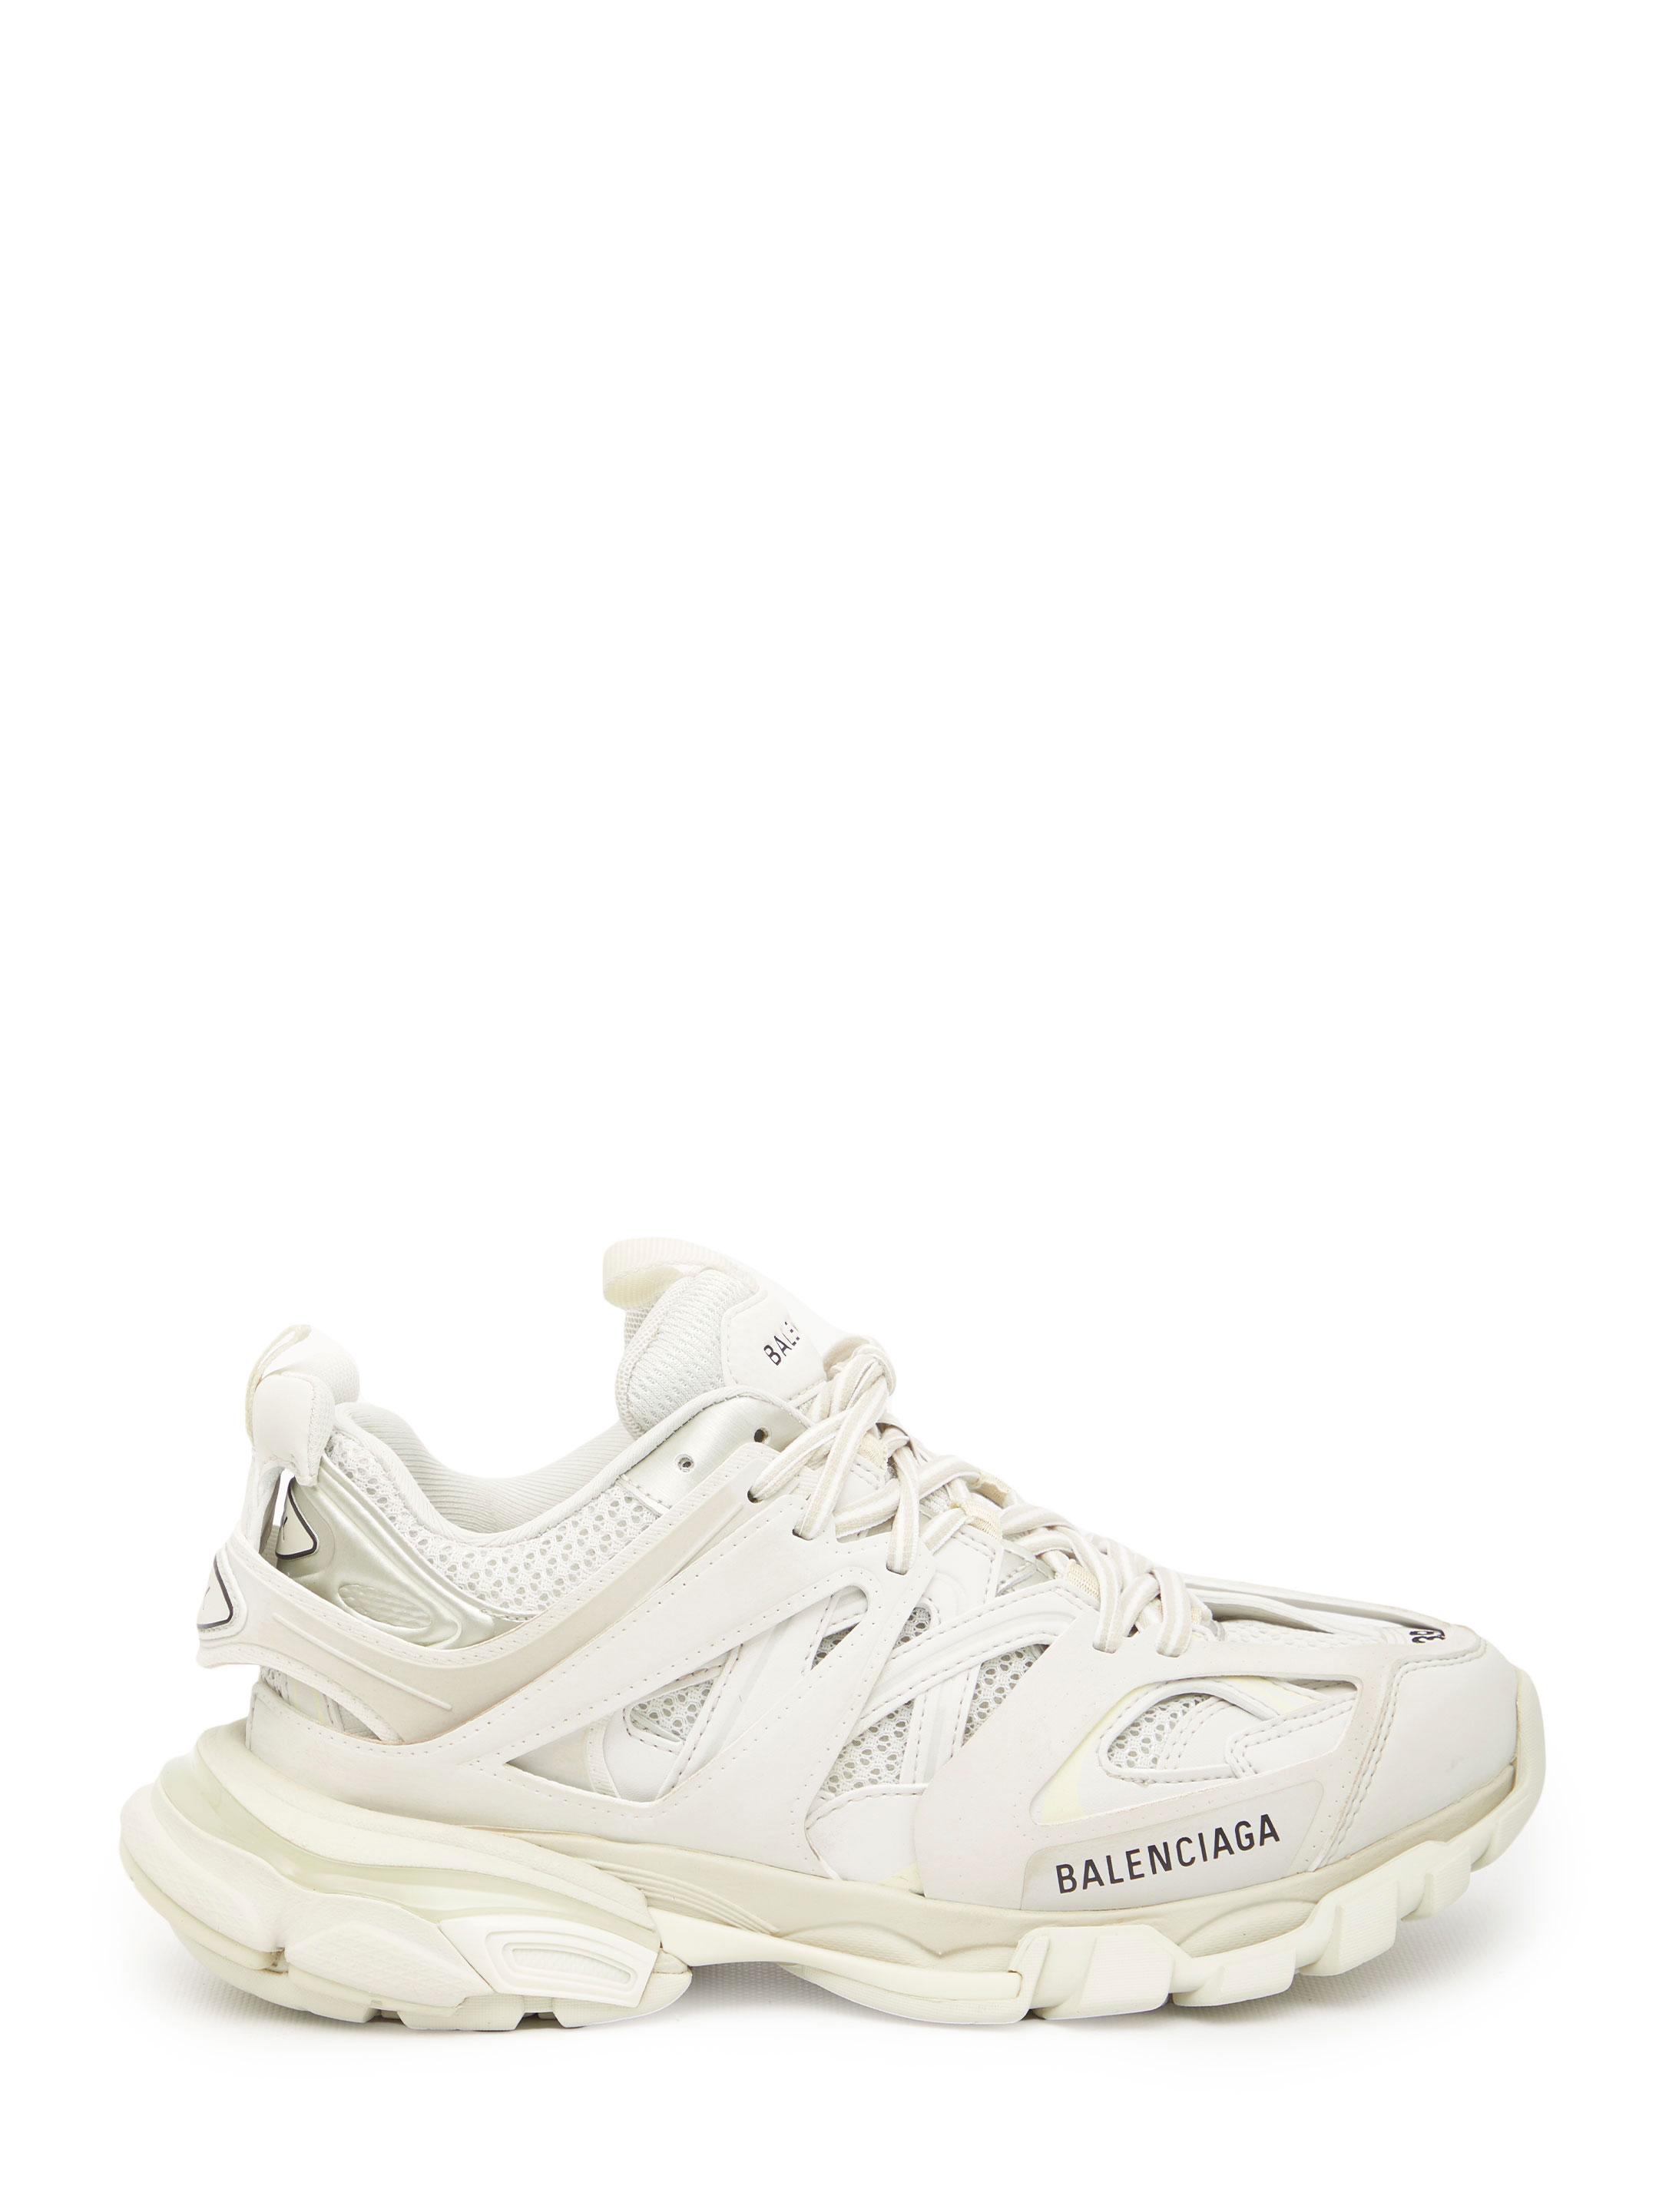 Balenciaga Track Sneakers in White | Lyst